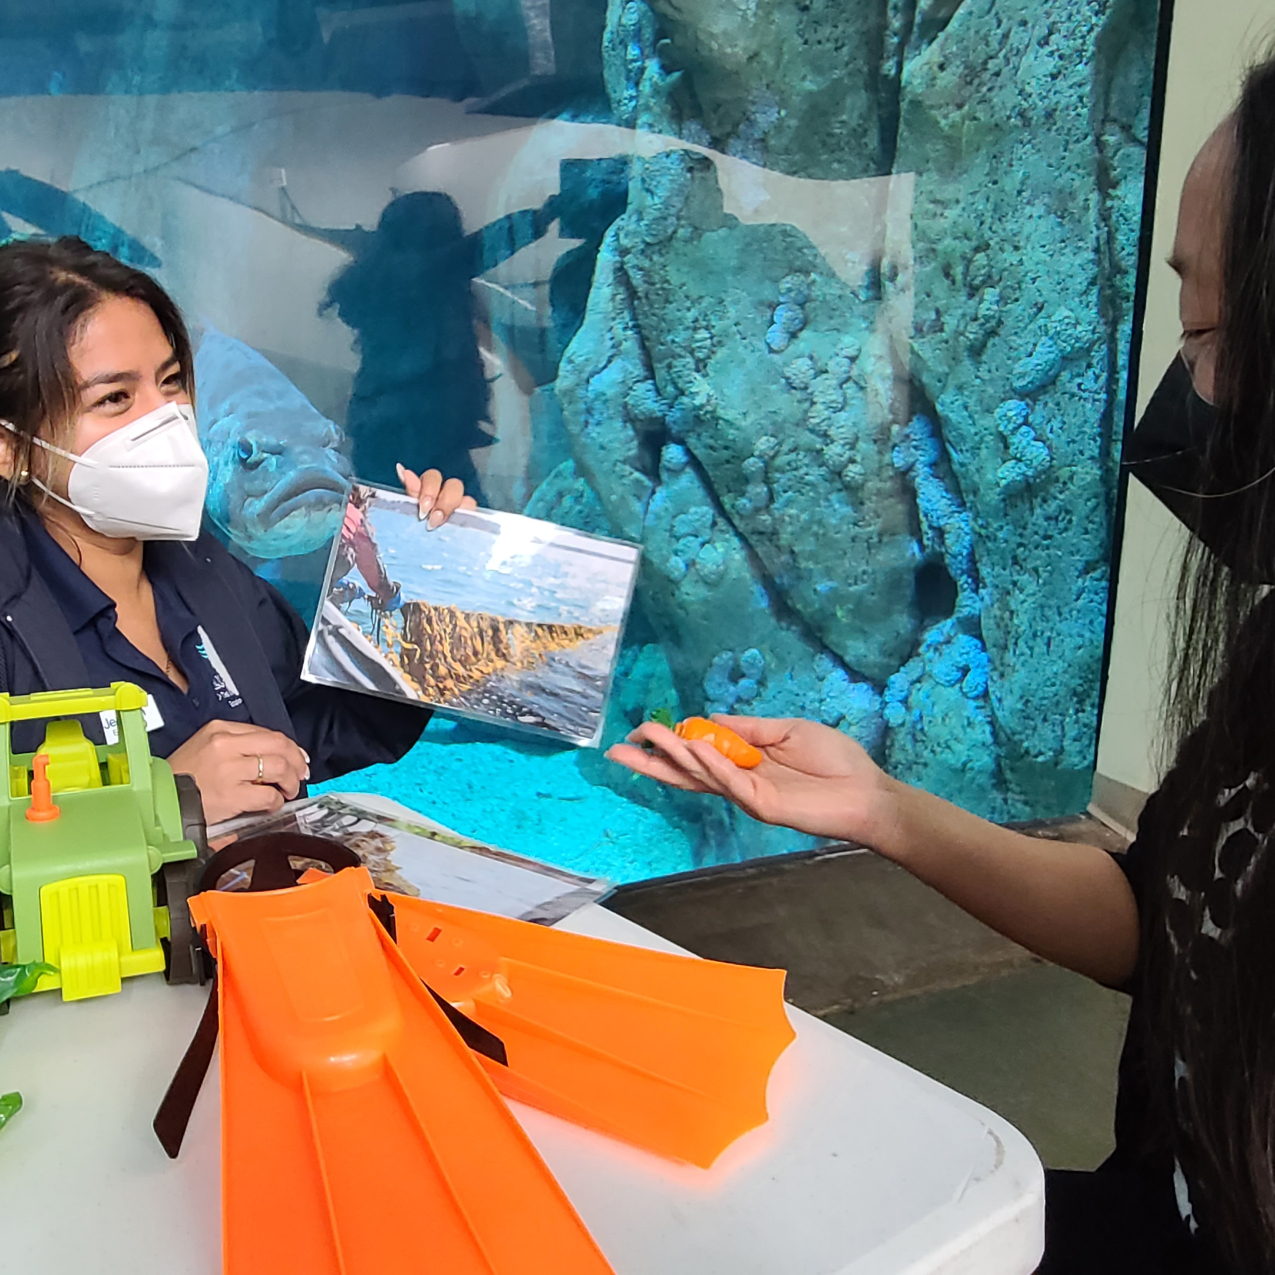 A person stands in front of a table with a plastic toy and scuba fins while conversing with a guest.